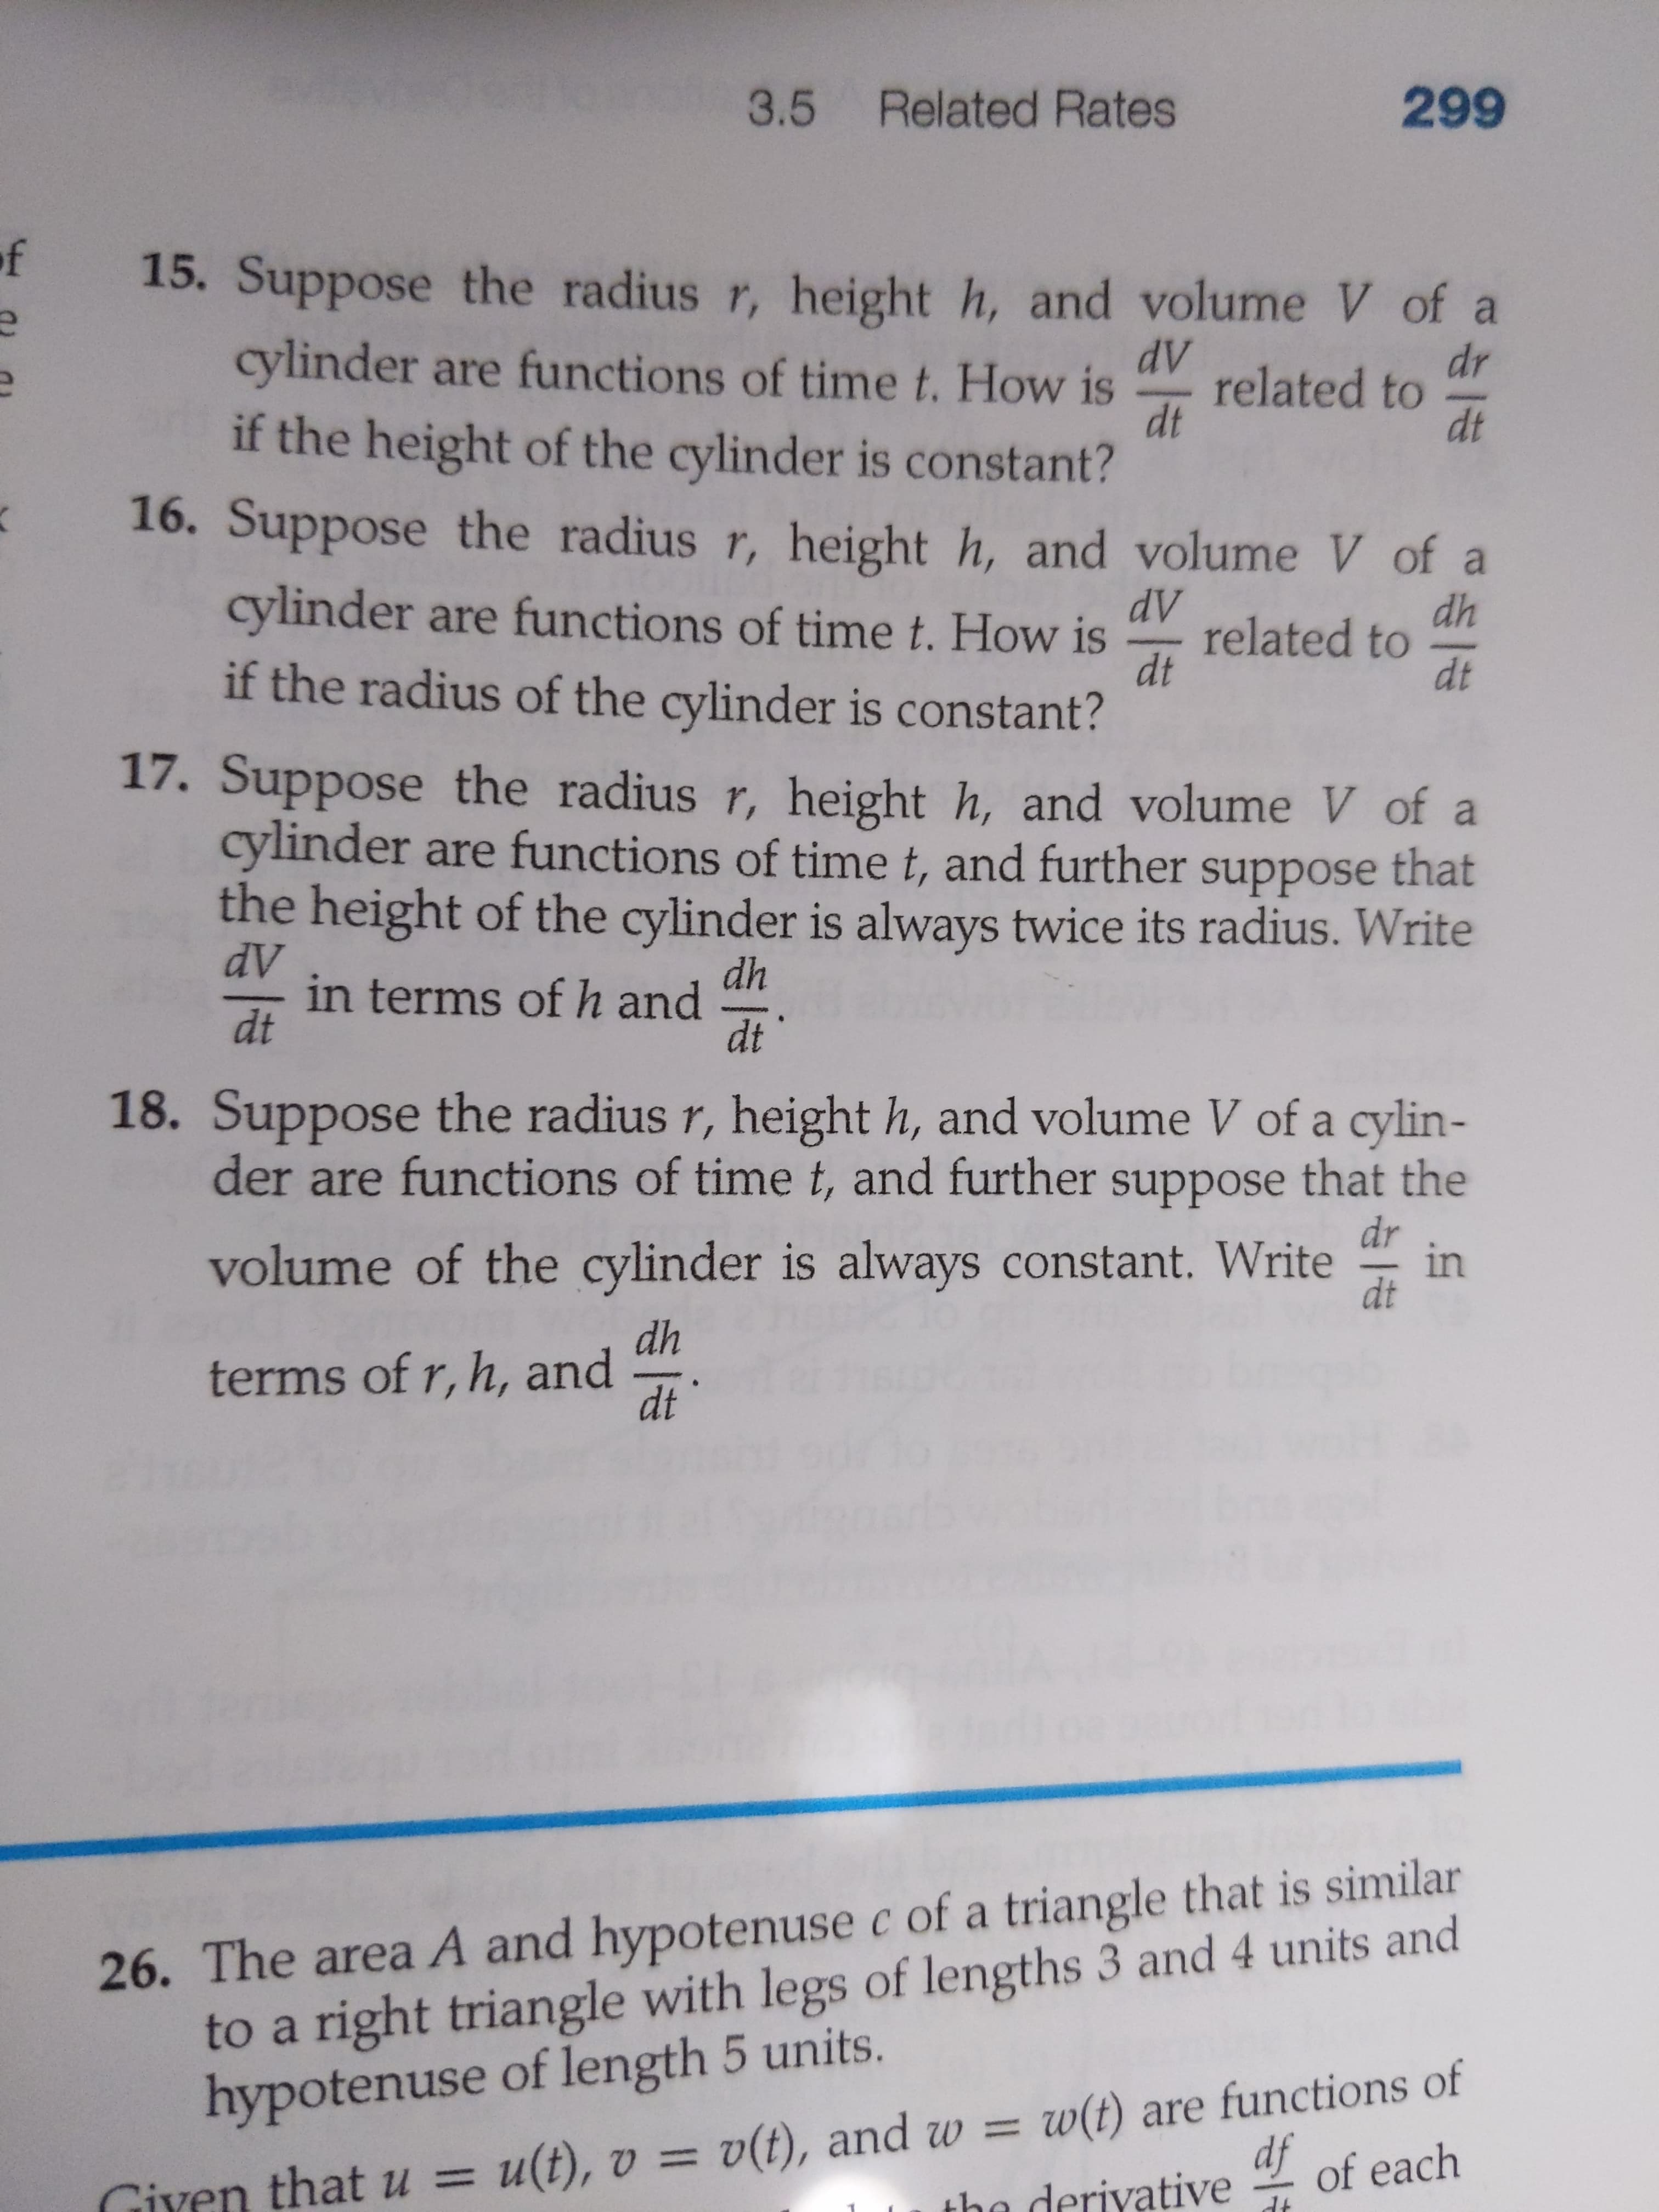 3.5 Related Rates
299
of
15. Suppose the radius r, height h, and volume V of a
dV
cylinder are functions of time t. How is
dr
related to
dt
dt
if the height of the cylinder is constant?
16. Suppose the radius r, height h, and volume V of a
cylinder are functions of time t. How is
dV
dh
related to
dt
dt
if the radius of the cylinder is constant?
17. Suppose the radius r, height h, and volume V of a
cylinder are functions of time t, and further suppose that
the height of the cylinder is always twice its radius. Write
dV
in terms of h and
dt
dh
dt
18. Suppose the radius r, height h, and volume V of a cylin-
der are functions of time t, and further
suppose that the
dr
in
dt
volume of the cylinder is always constant. Write
dh
terms of r, h, and
dt
26. The area A and hypotenuse c of a triangle that is similar
to a right triangle with legs of lengths 3 and 4 units and
hypotenuse of length 5 units.
u(t), v = v(t), and w = w(t) are functions of
the derivative
df
Giyen that u =
%D1
of each
